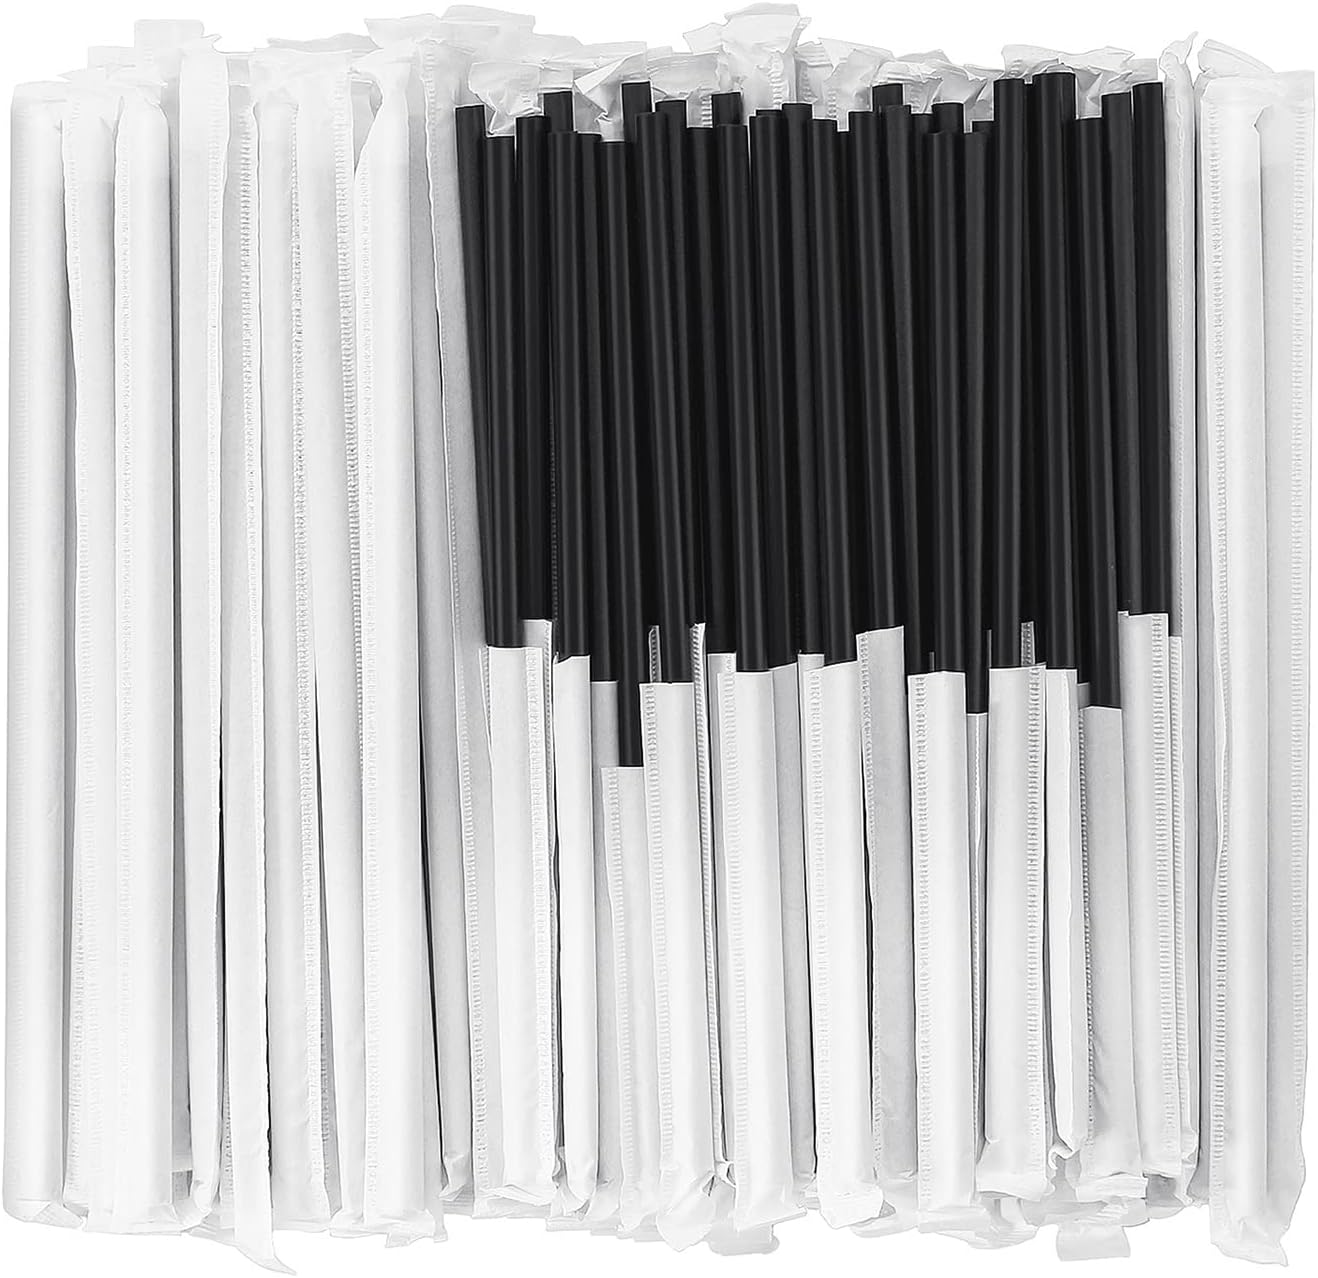 300 pcs biodegradable compostable individually wrapped straws pla disposable plant based eco friendly black straws 825 l